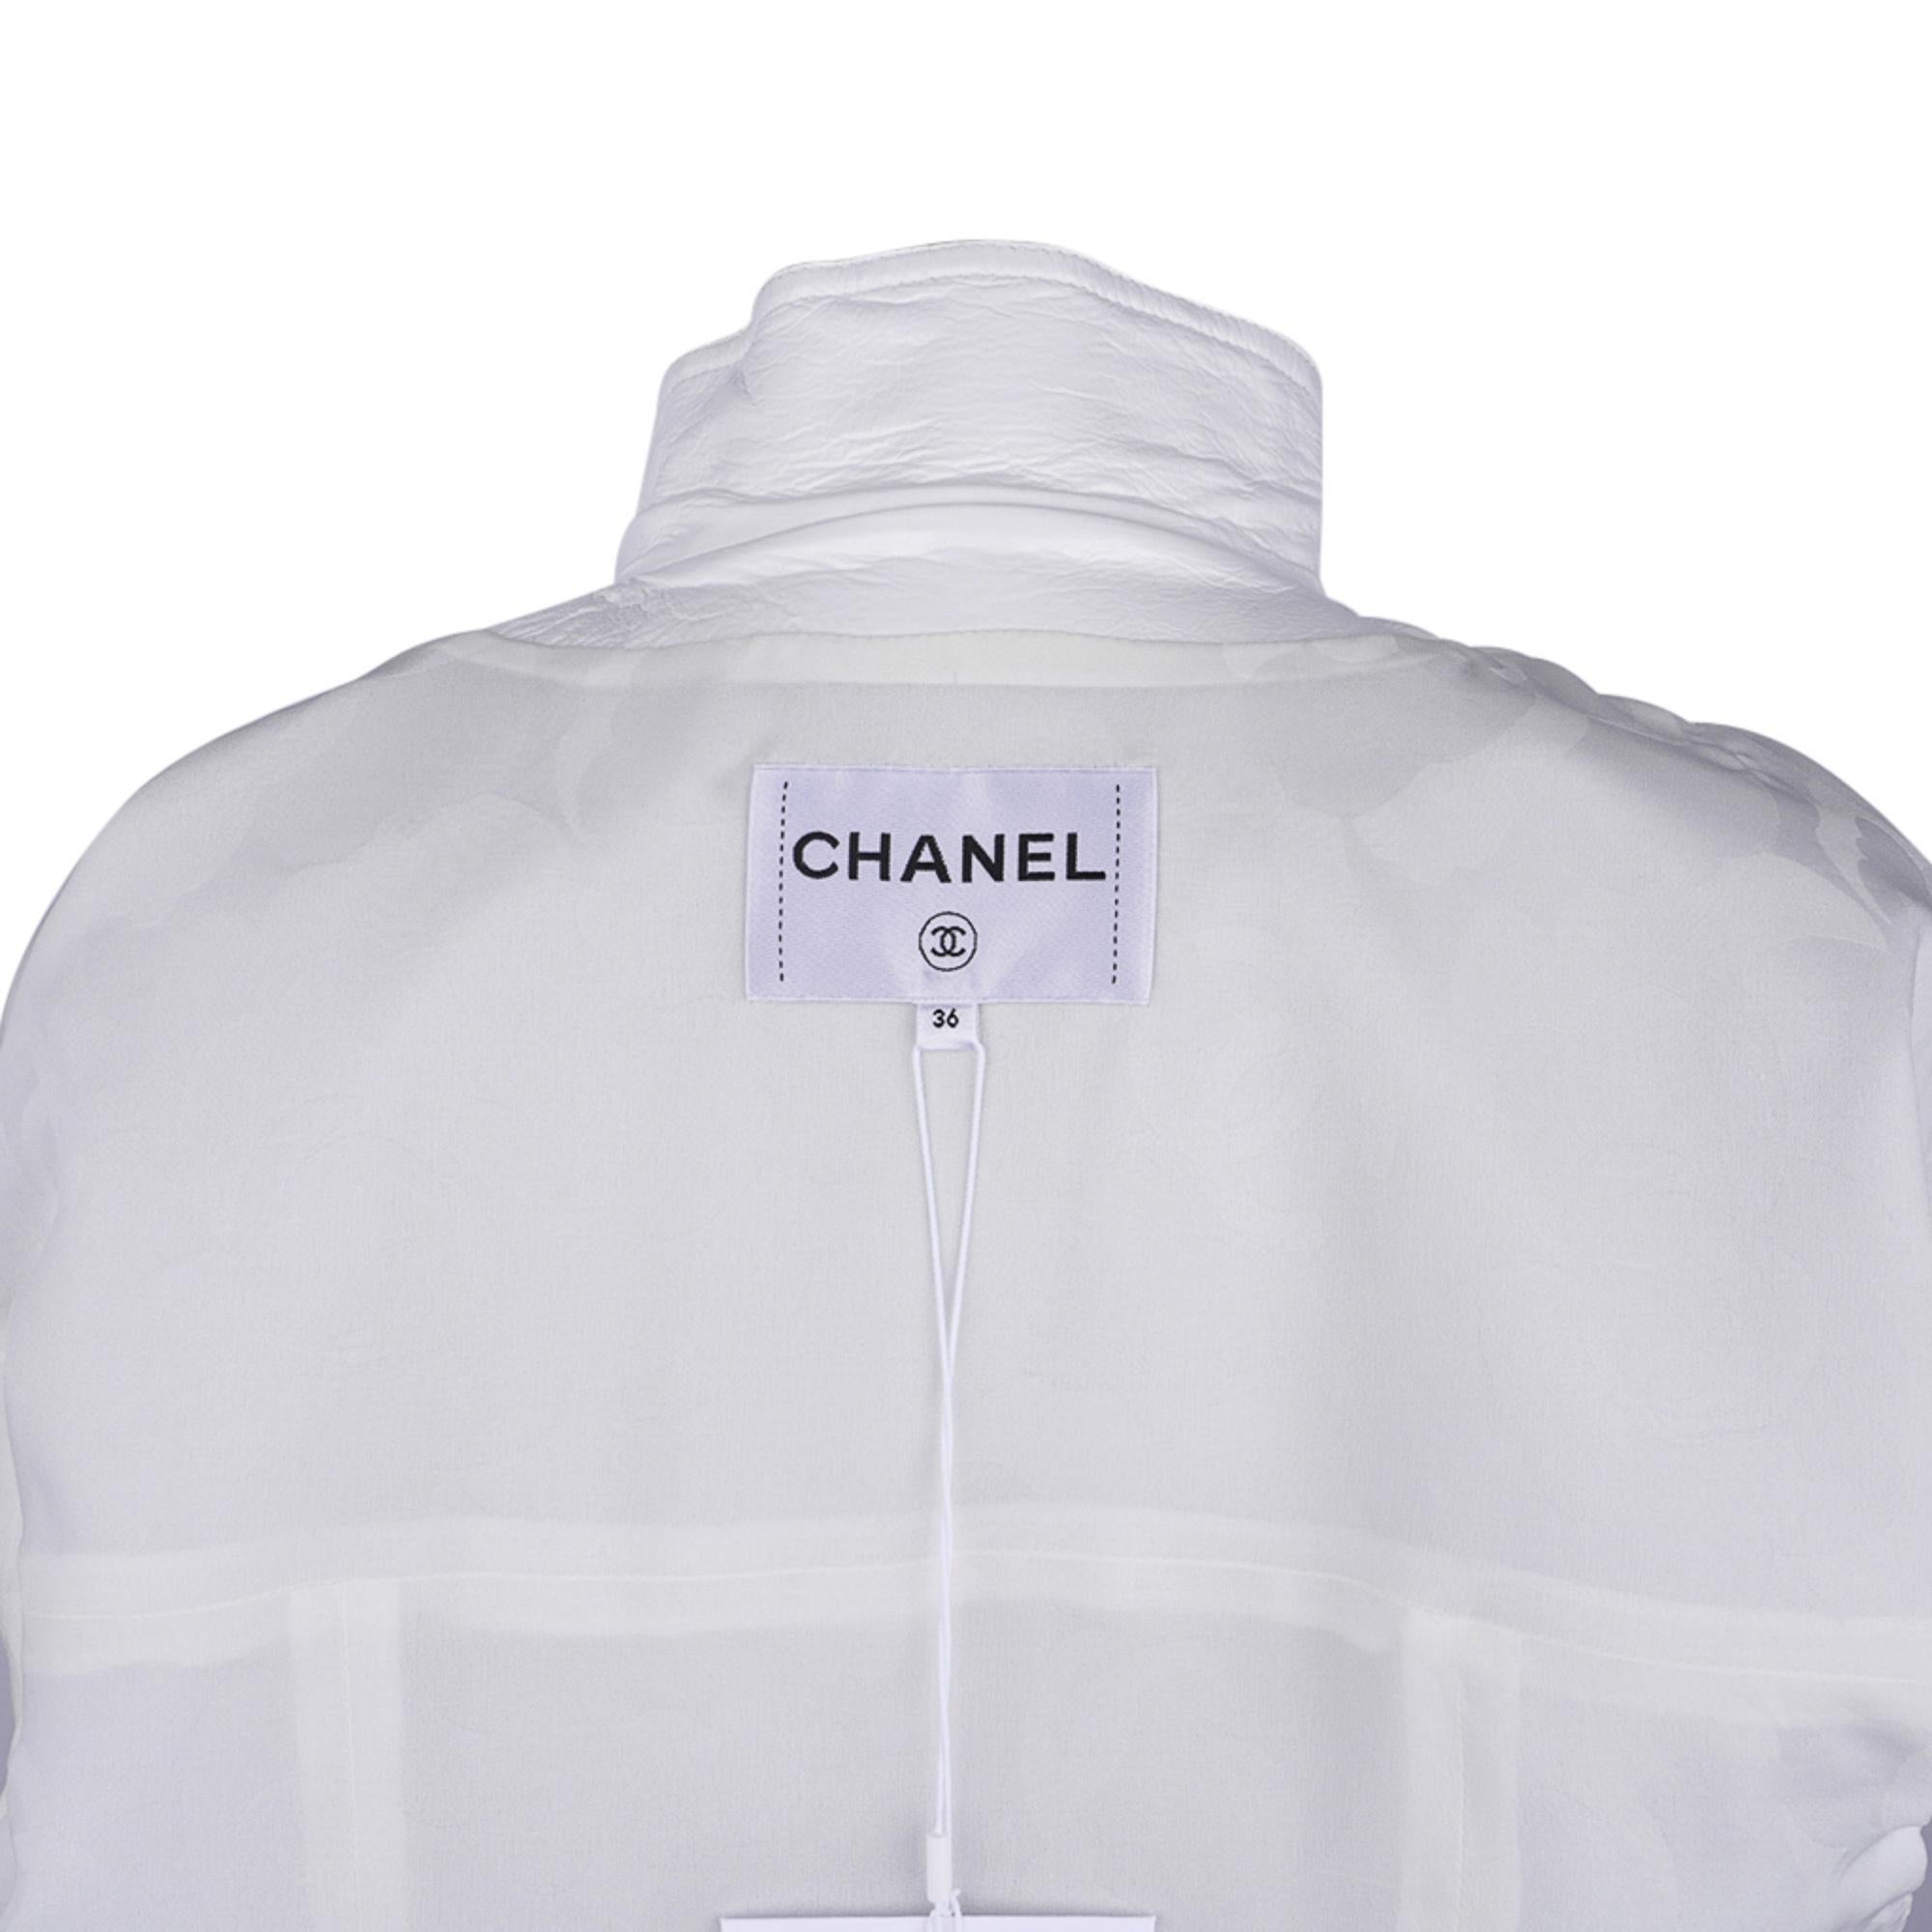 Chanel 2020-21FW Jacket White Patent Leather Short Biker Style 36 / 4 New w/Tags For Sale 5